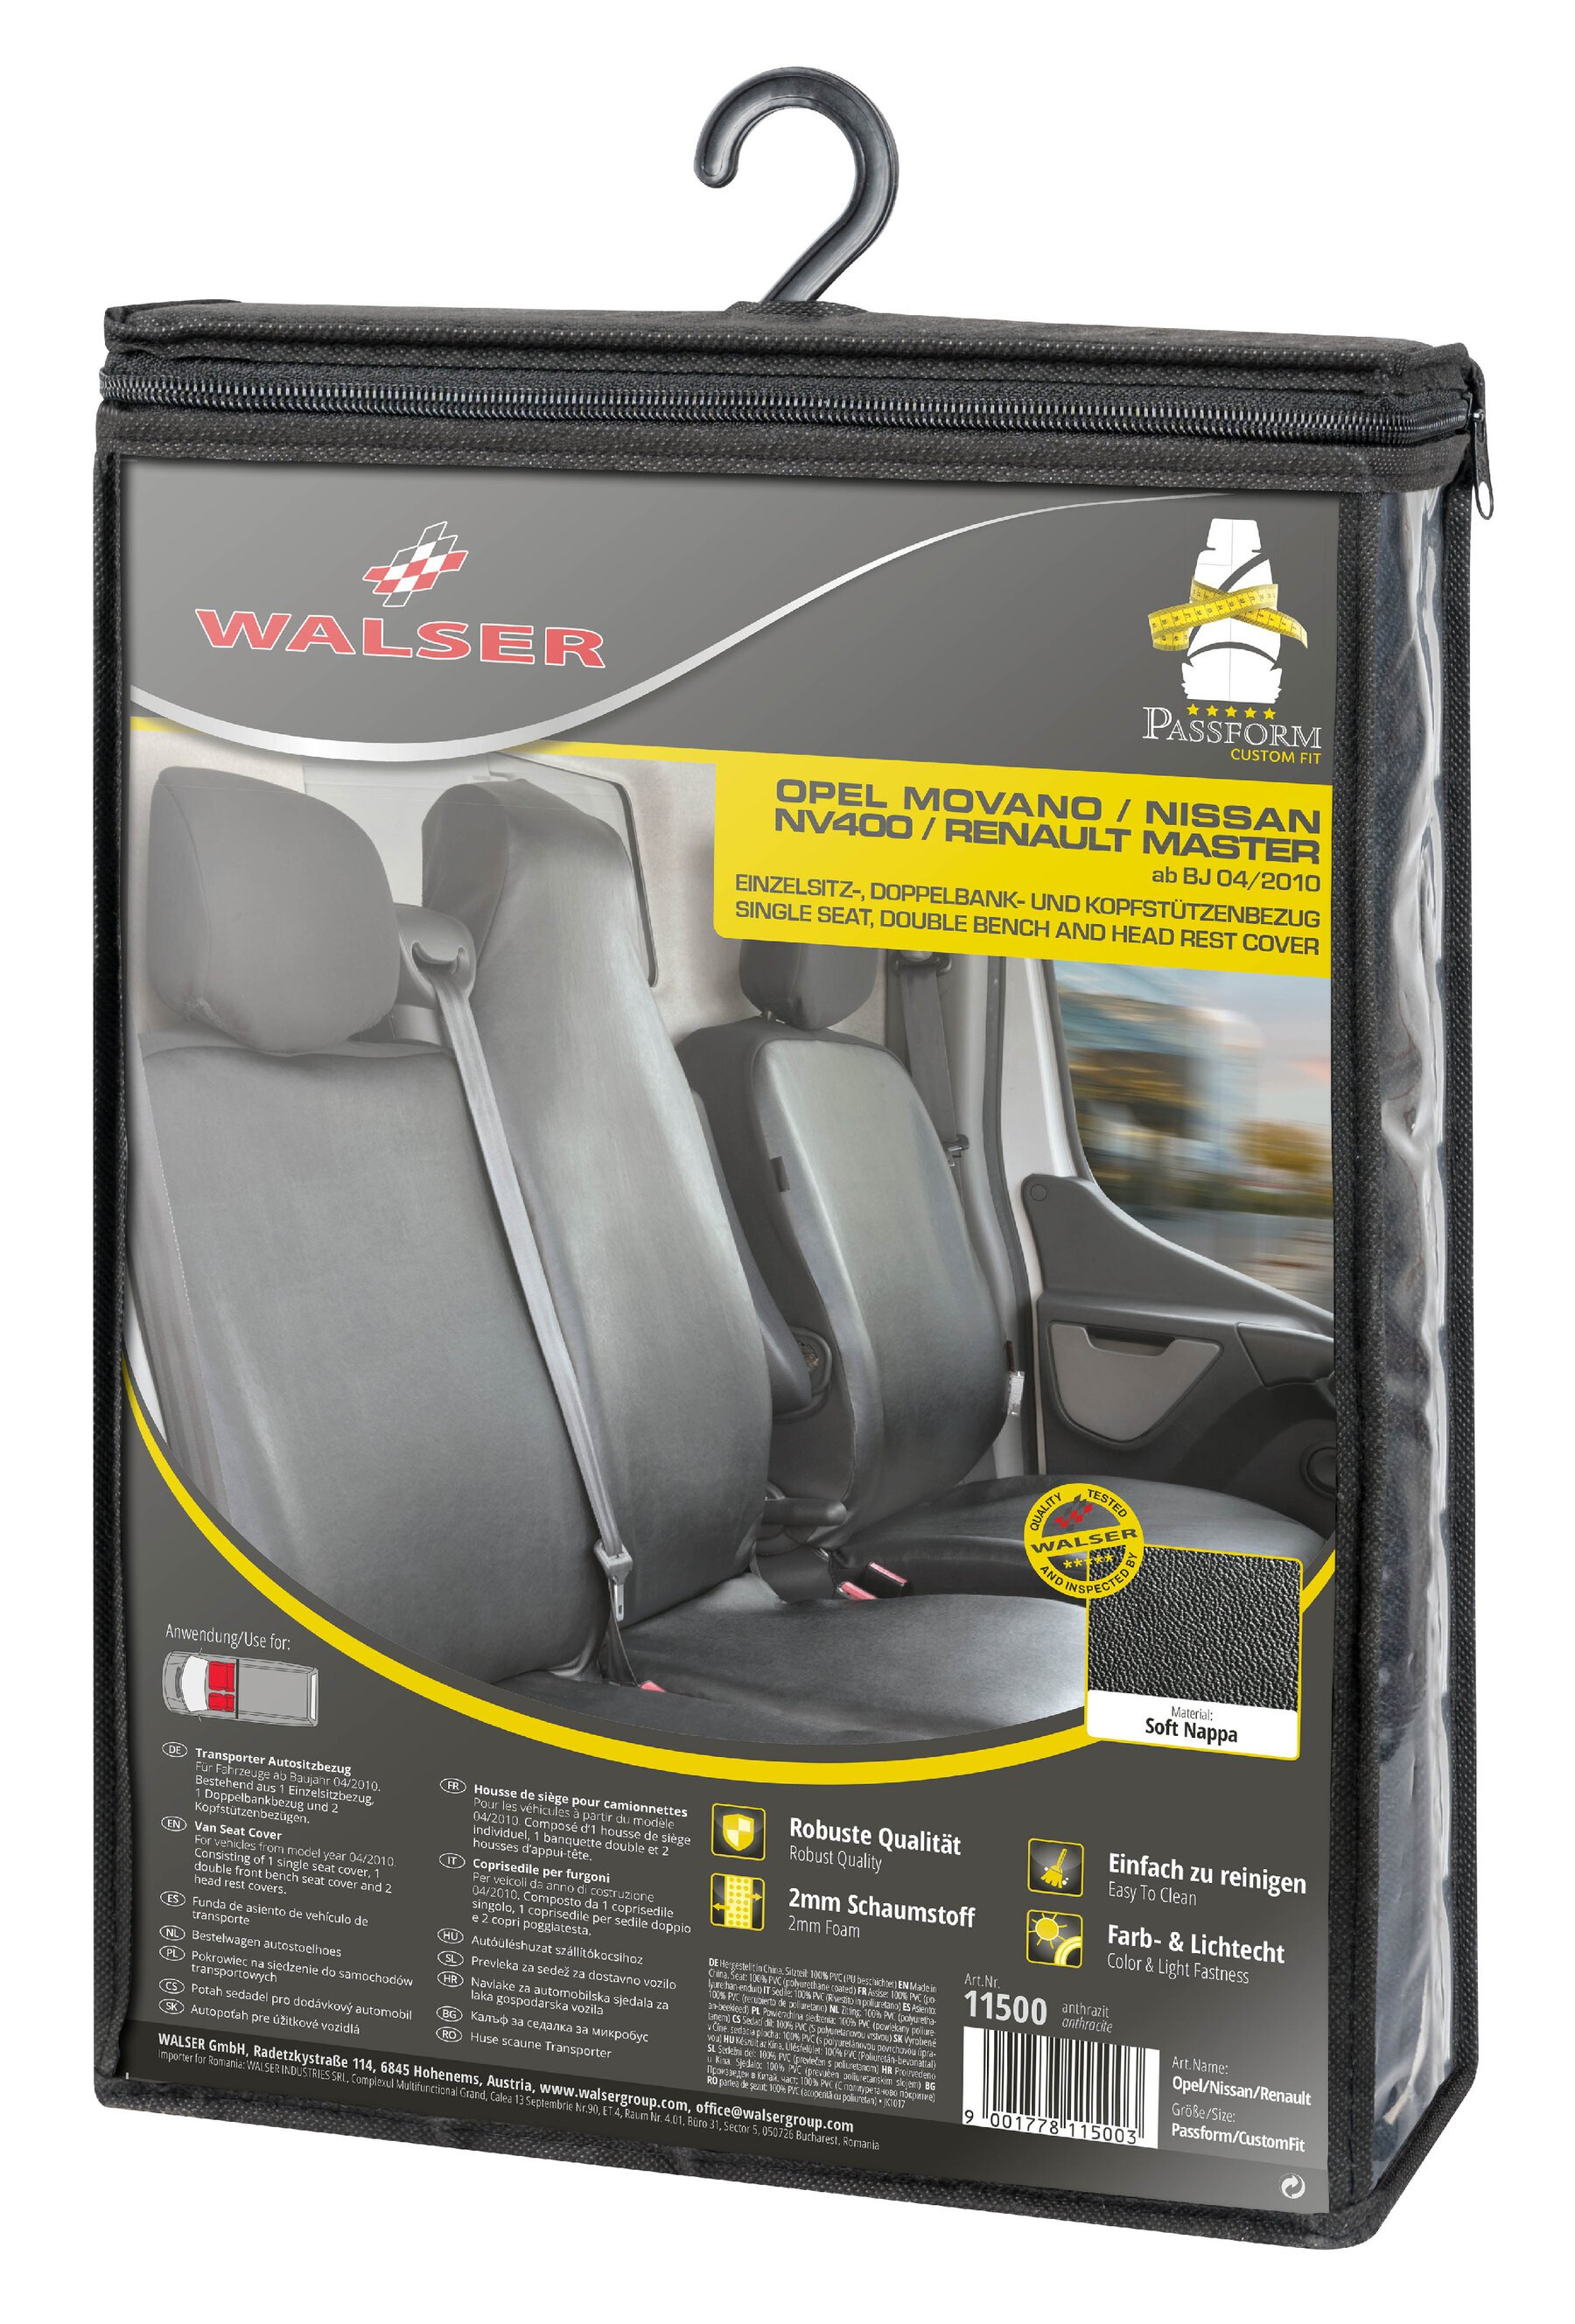 Car Seat cover Transporter made of imitation leather for Opel Movano, Renault Master, Nissan Interstar, single & double seat